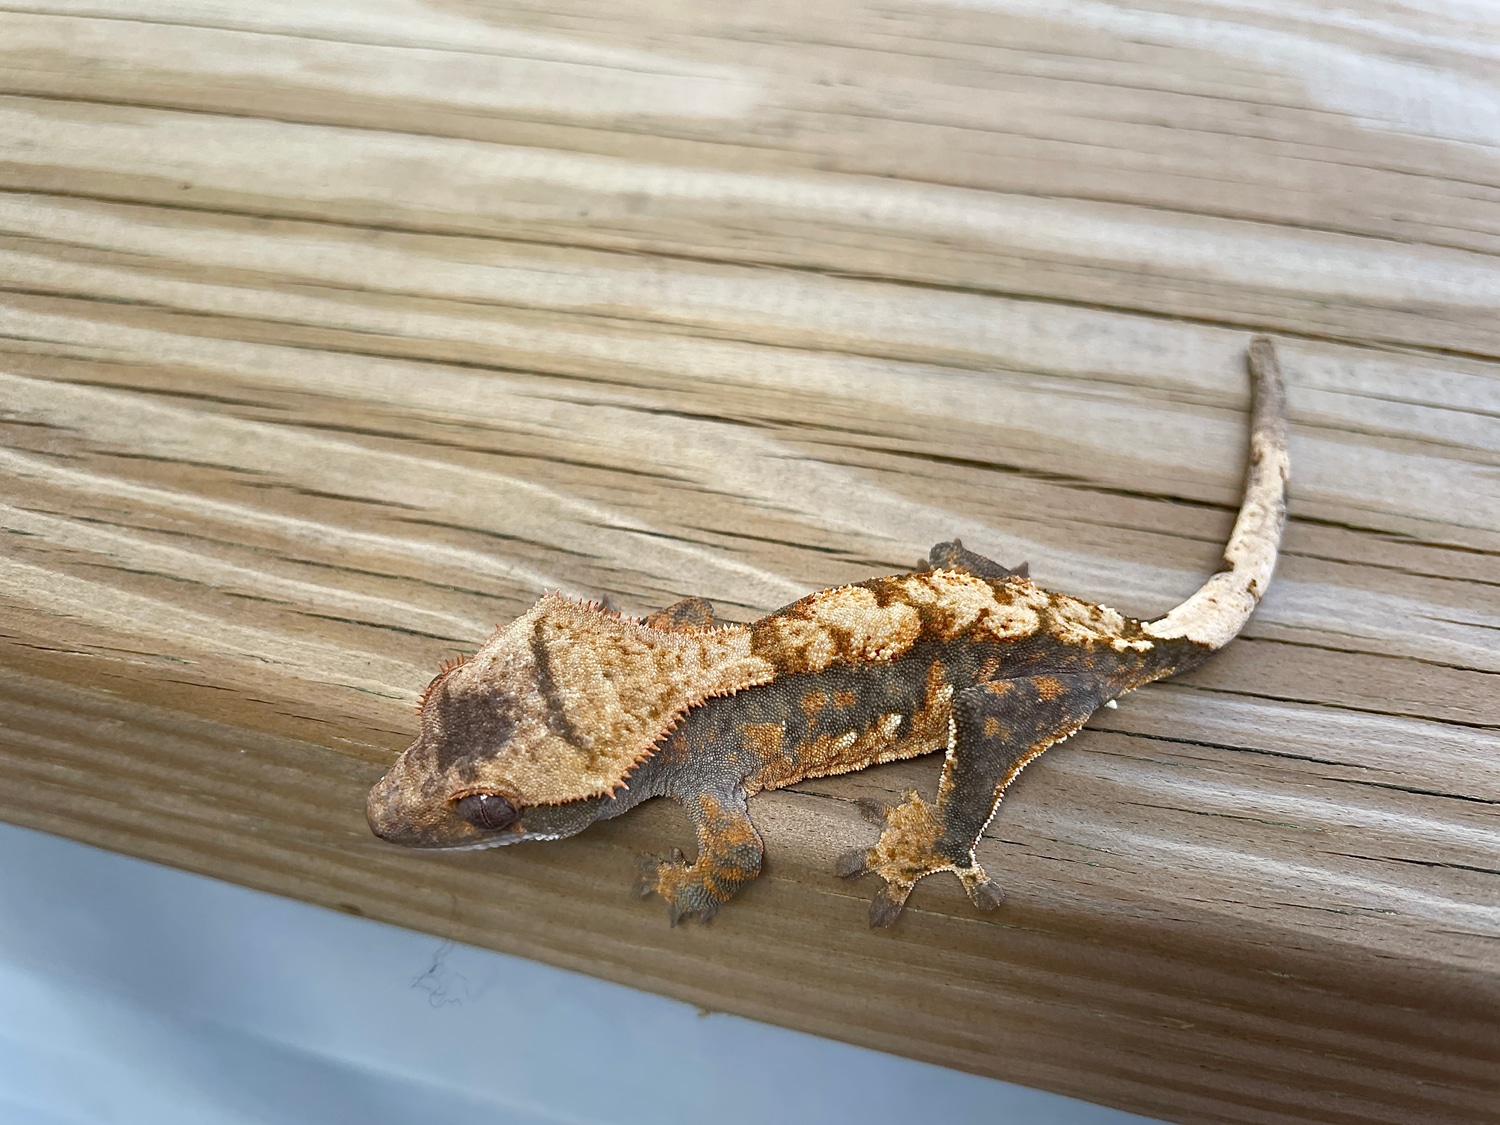 Harlequin Crested Gecko by Graces Geckos